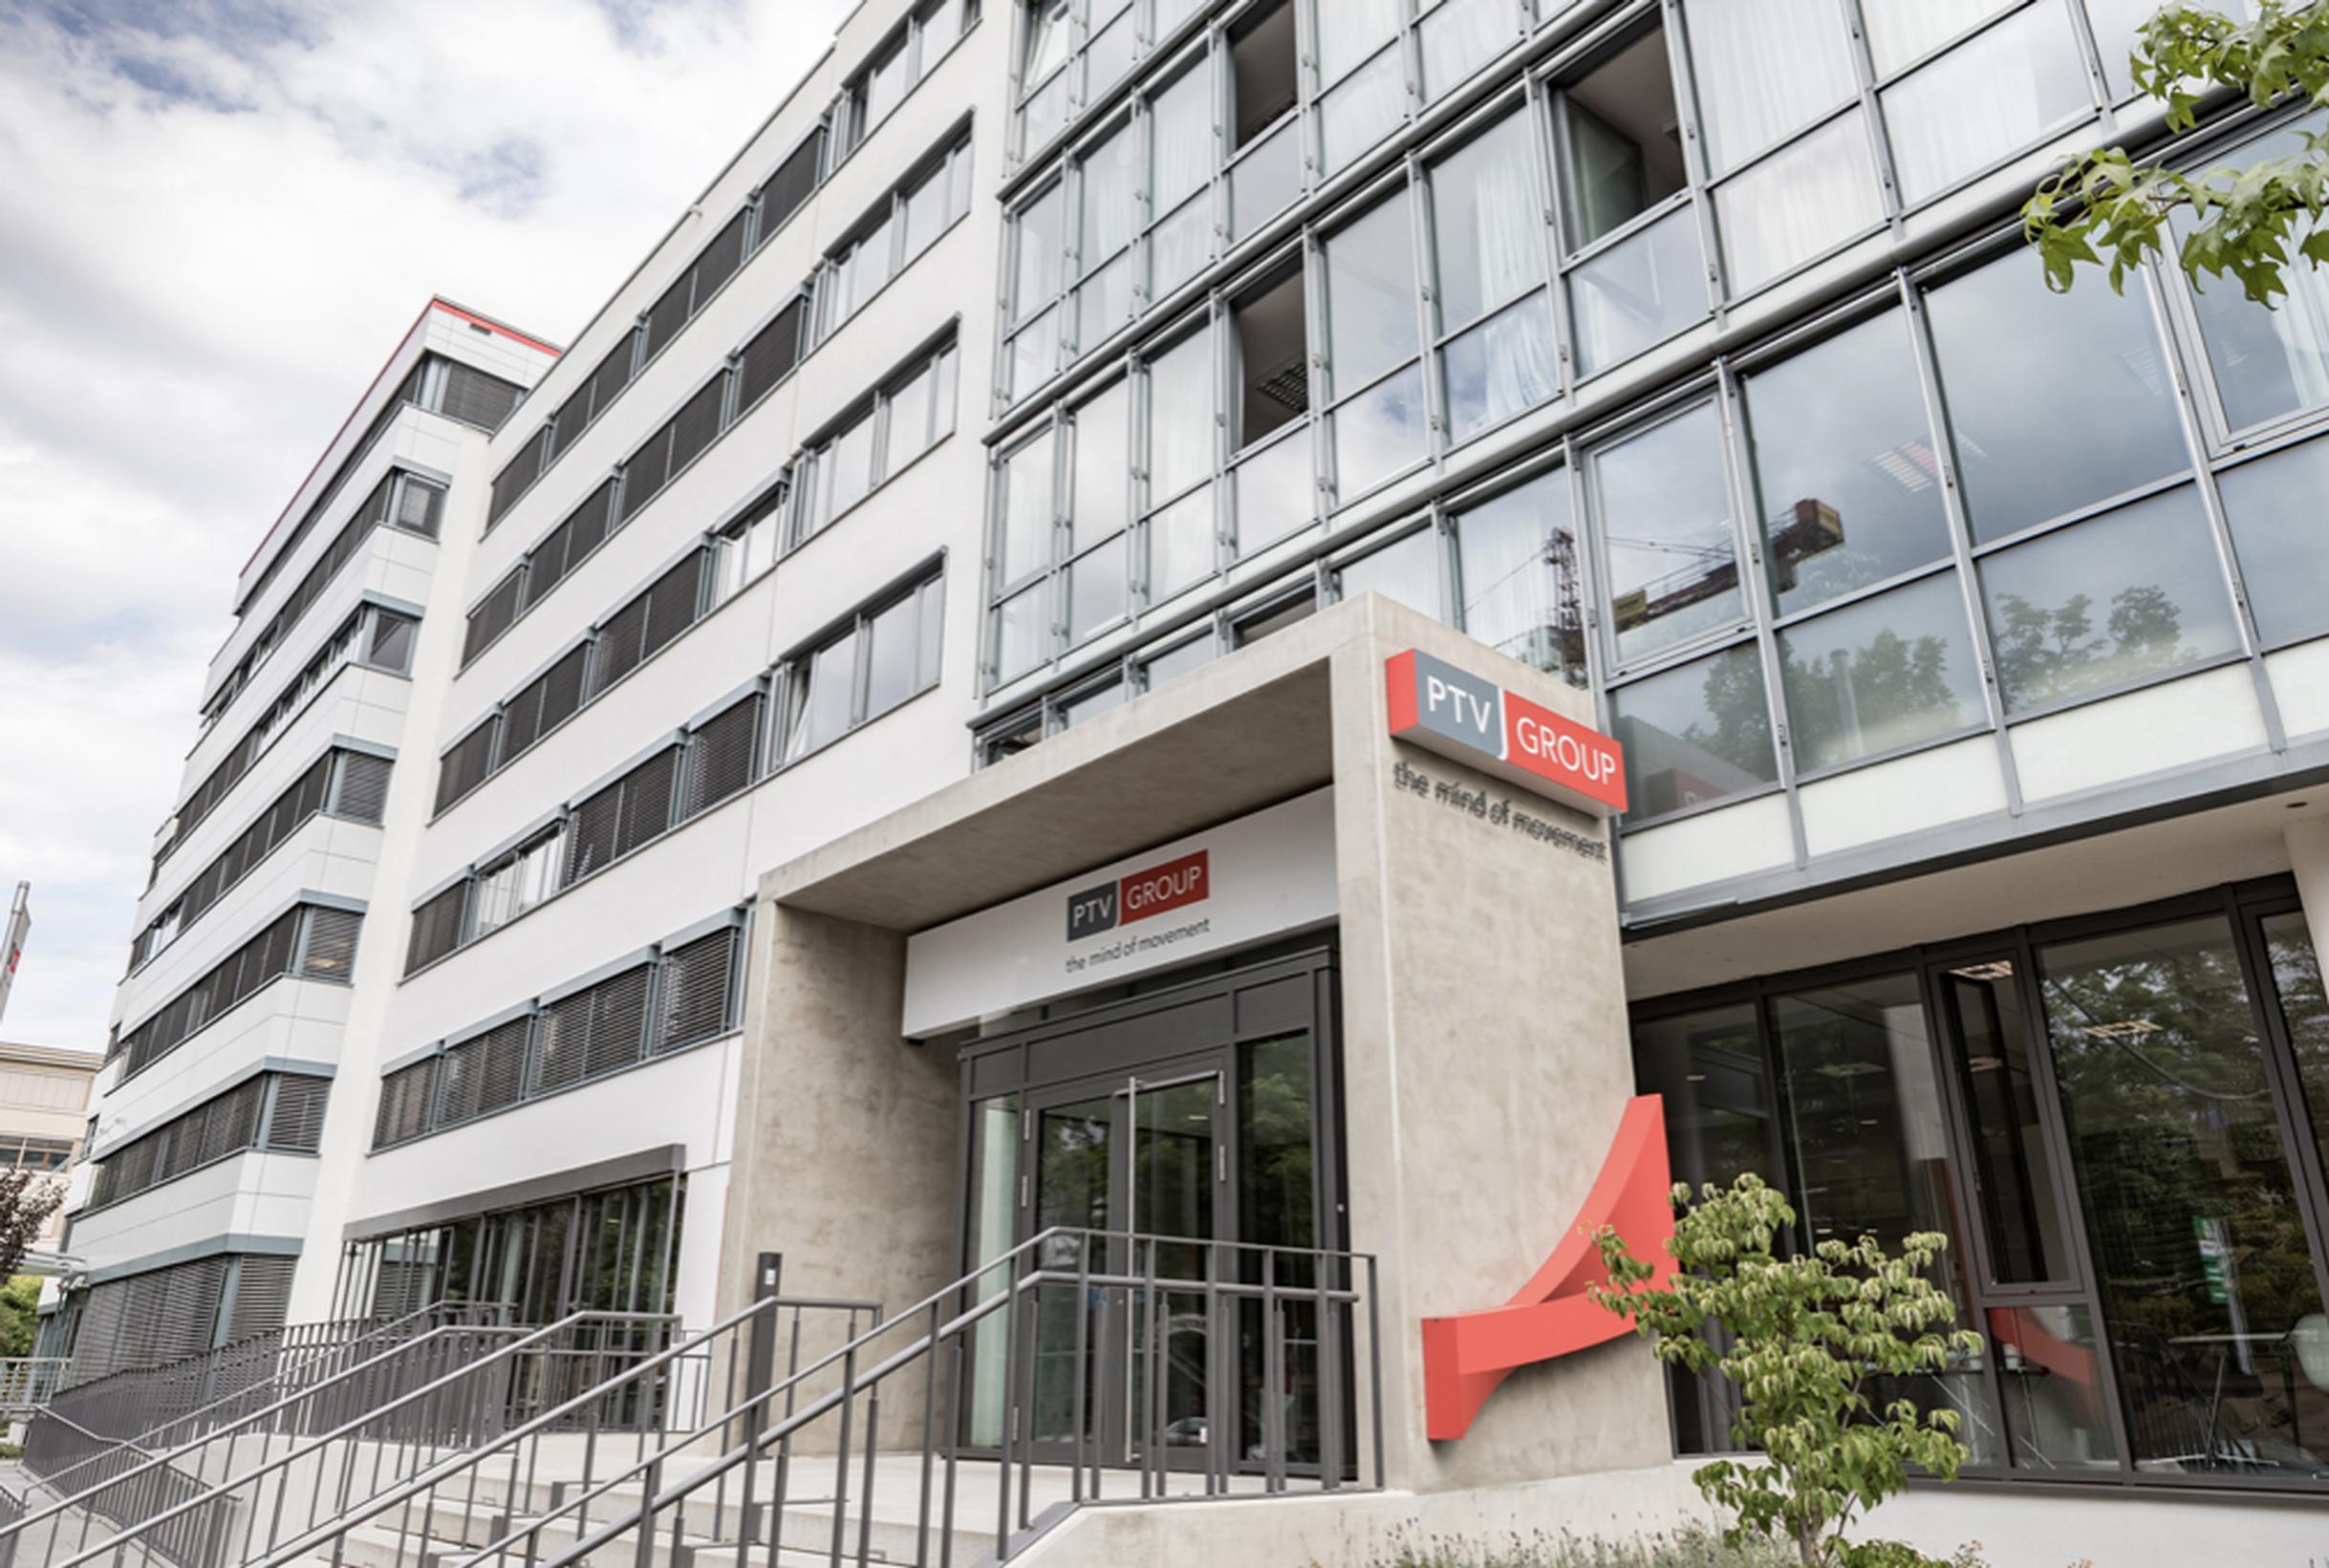 PTV Group`s headquarters are in Karlsruhe, Germany